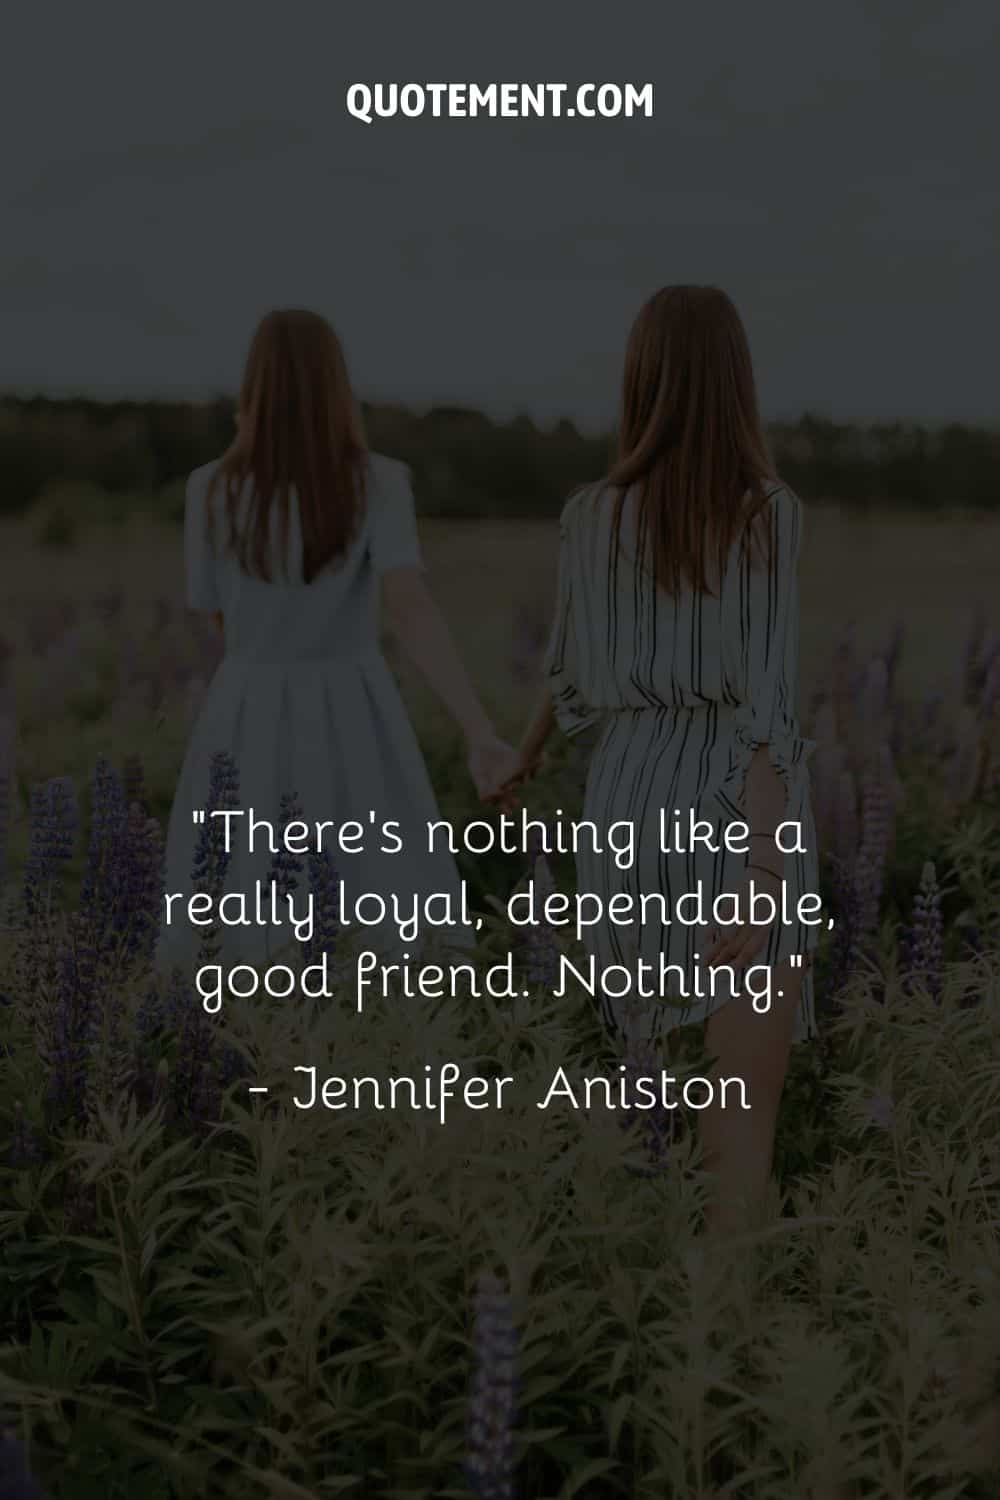 “There’s nothing like a really loyal, dependable, good friend. Nothing.” — Jennifer Aniston